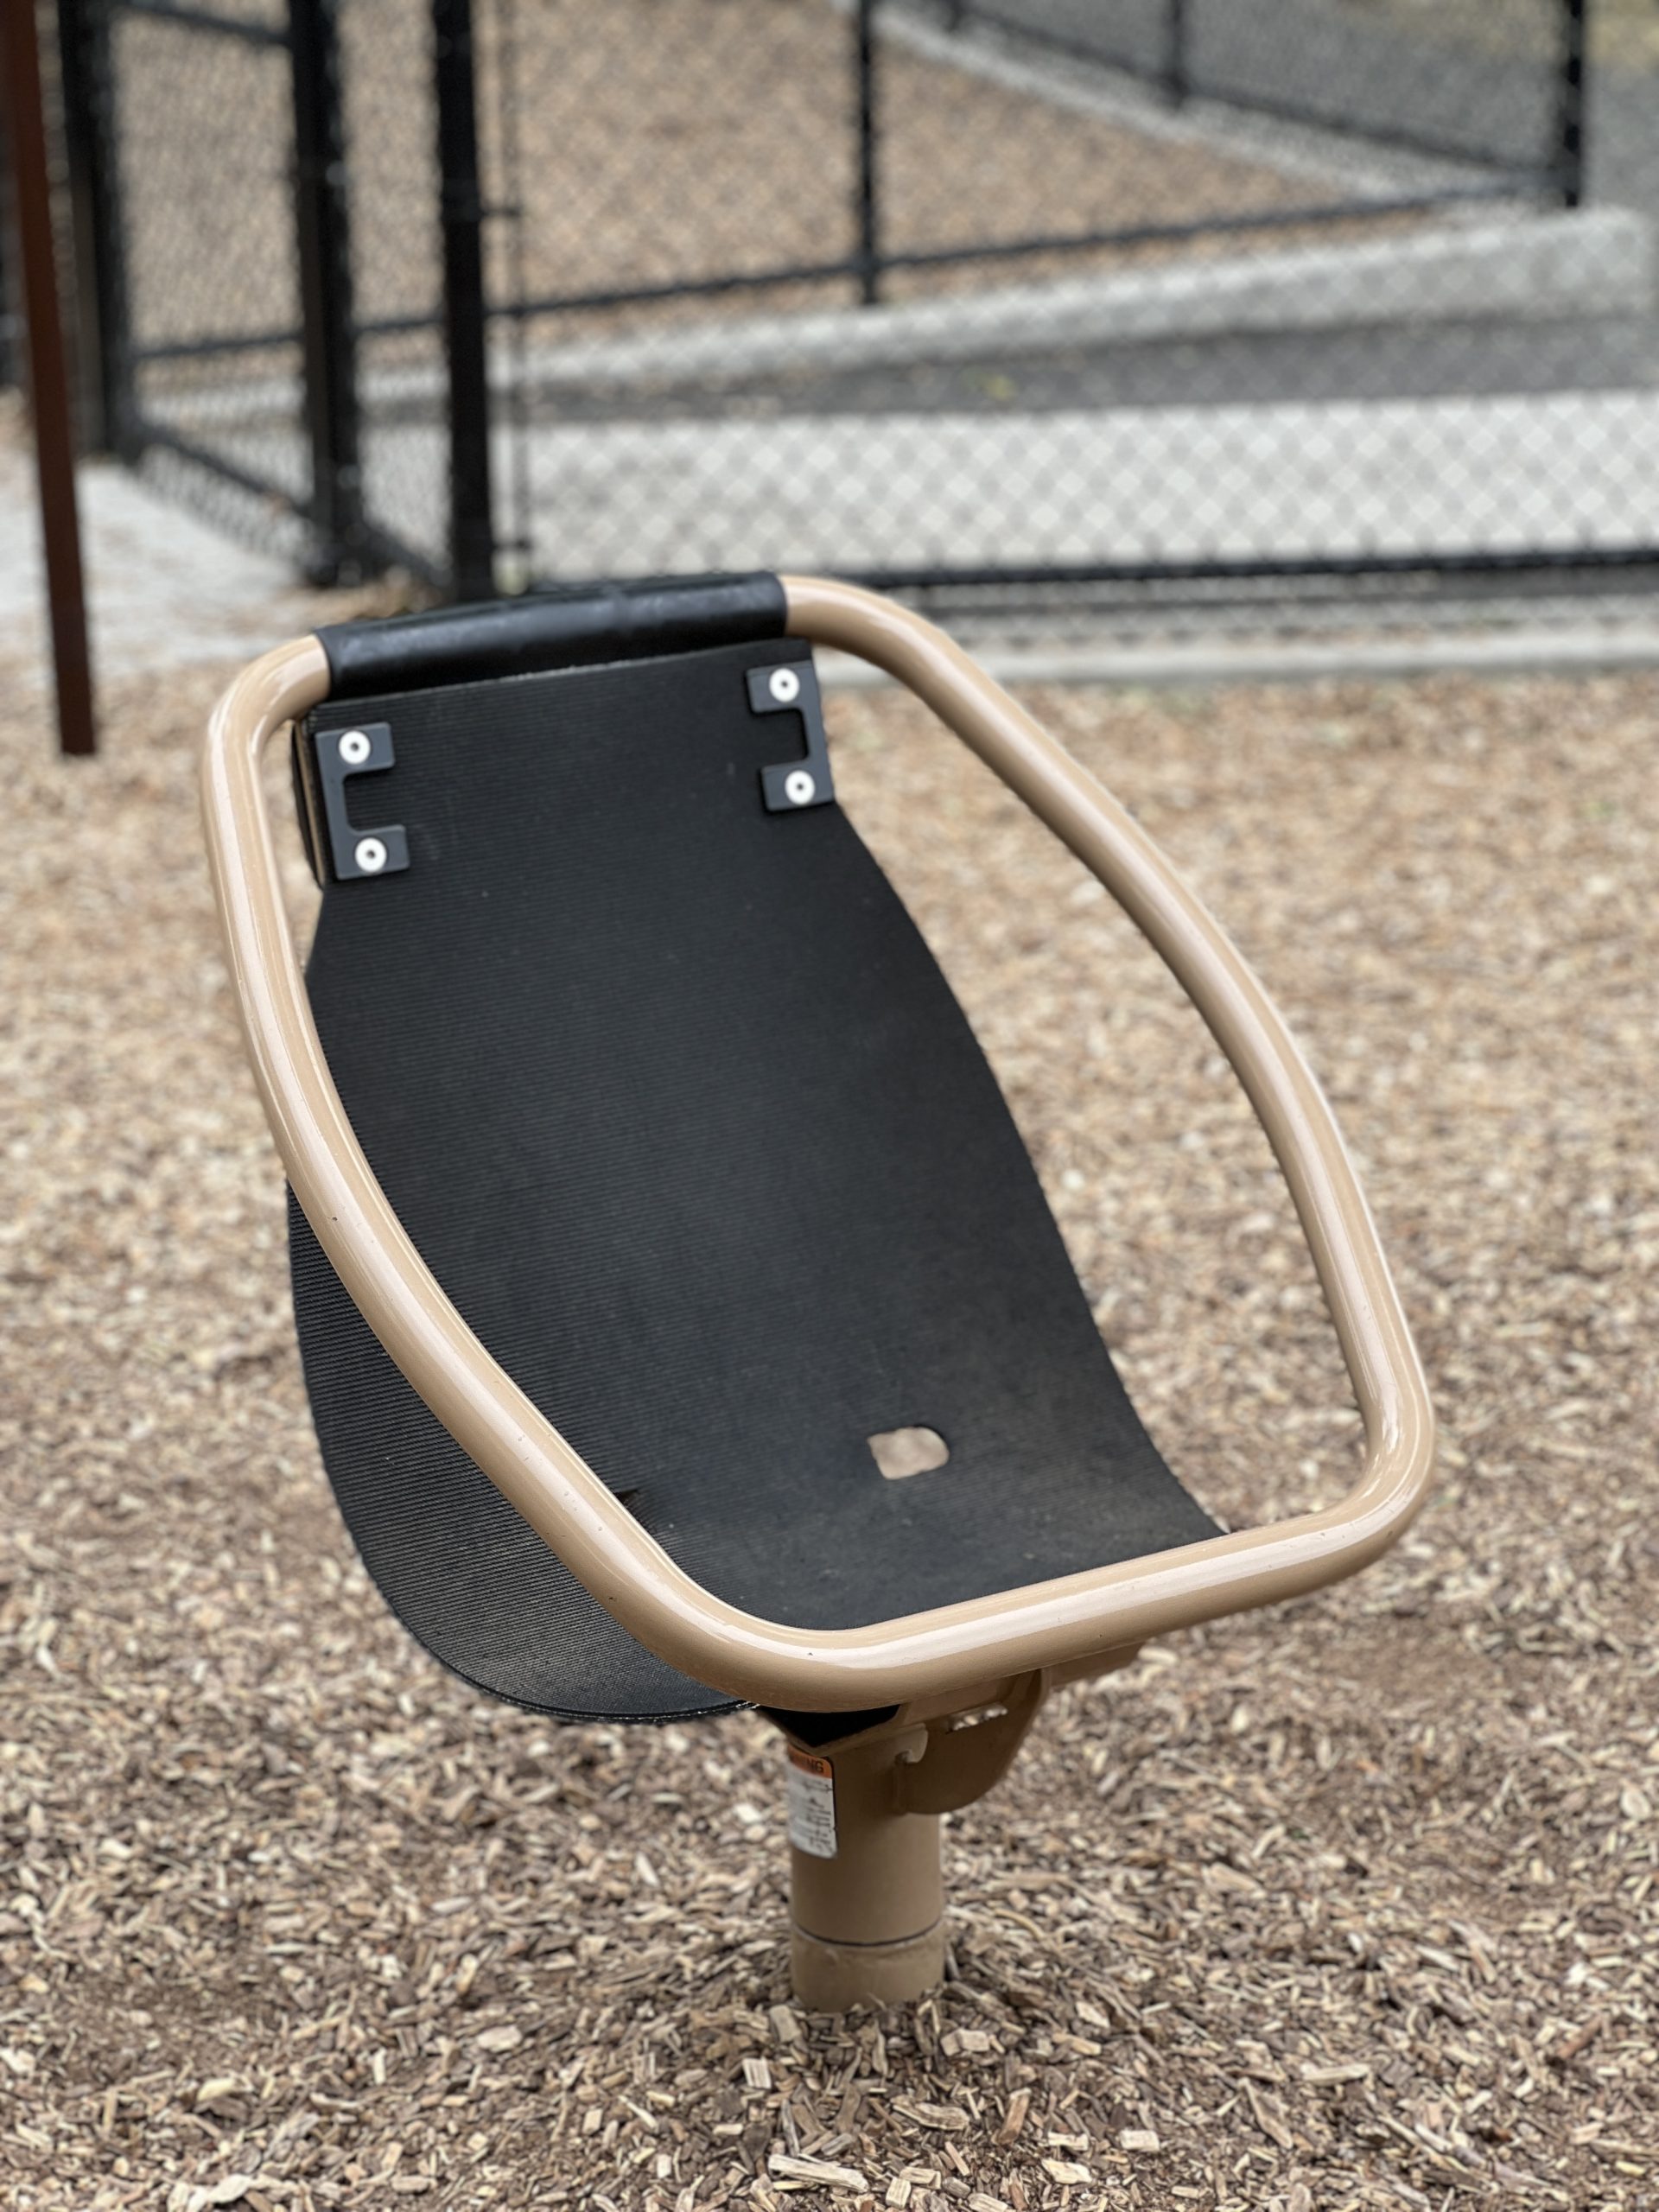 Goffle Brook Park Playground in Hawthorne NJ - Features - spinning seat TALL image